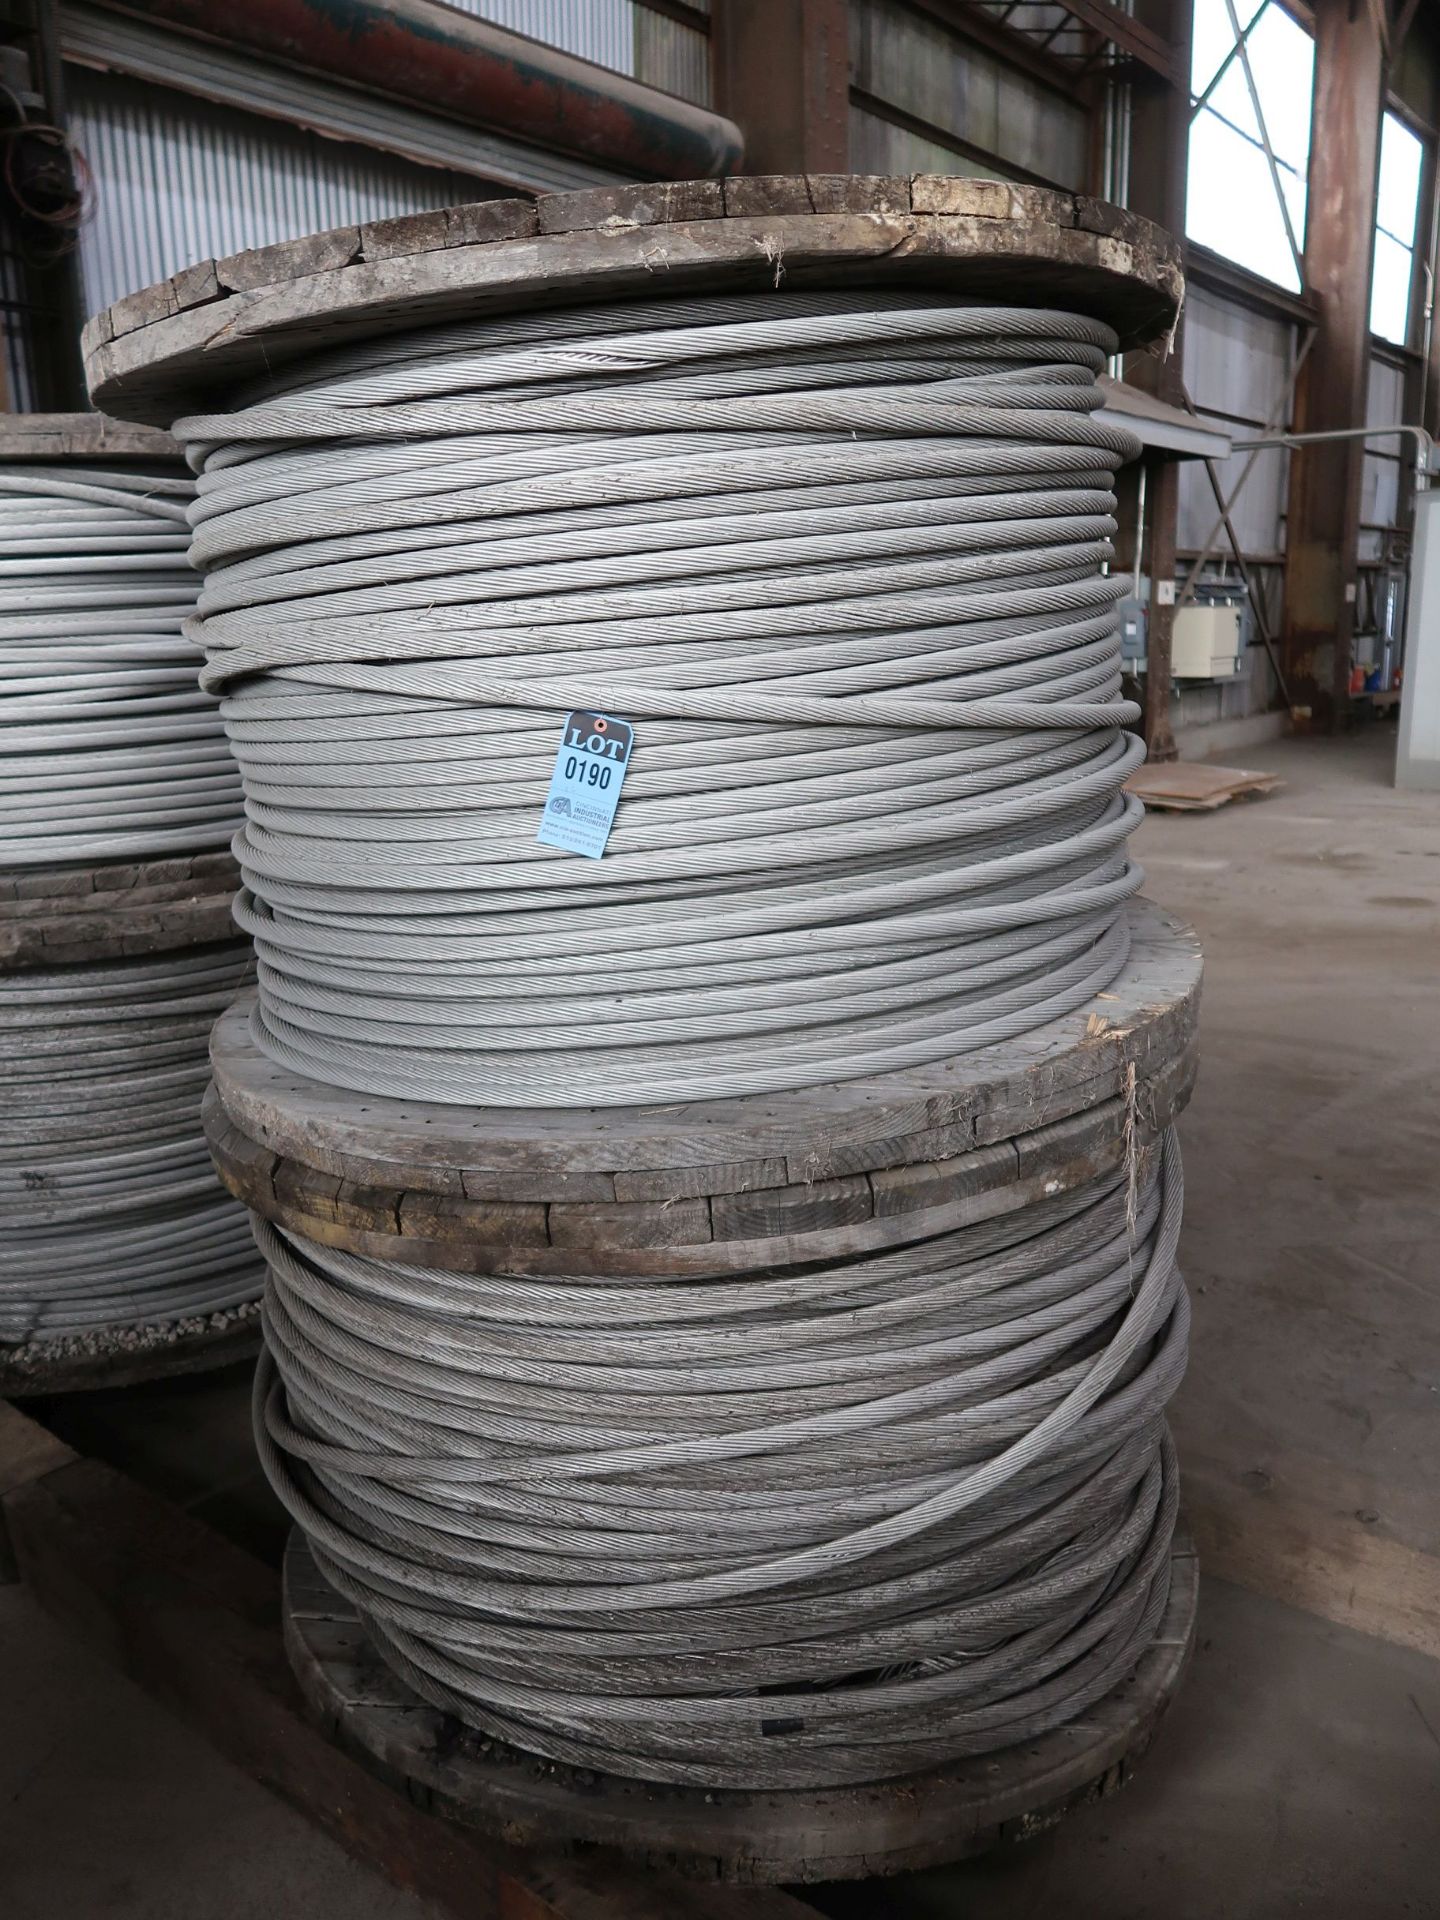 ROLLS 1590 ACRS ALUMINUM WIRE, UNKNOWN LENGTH